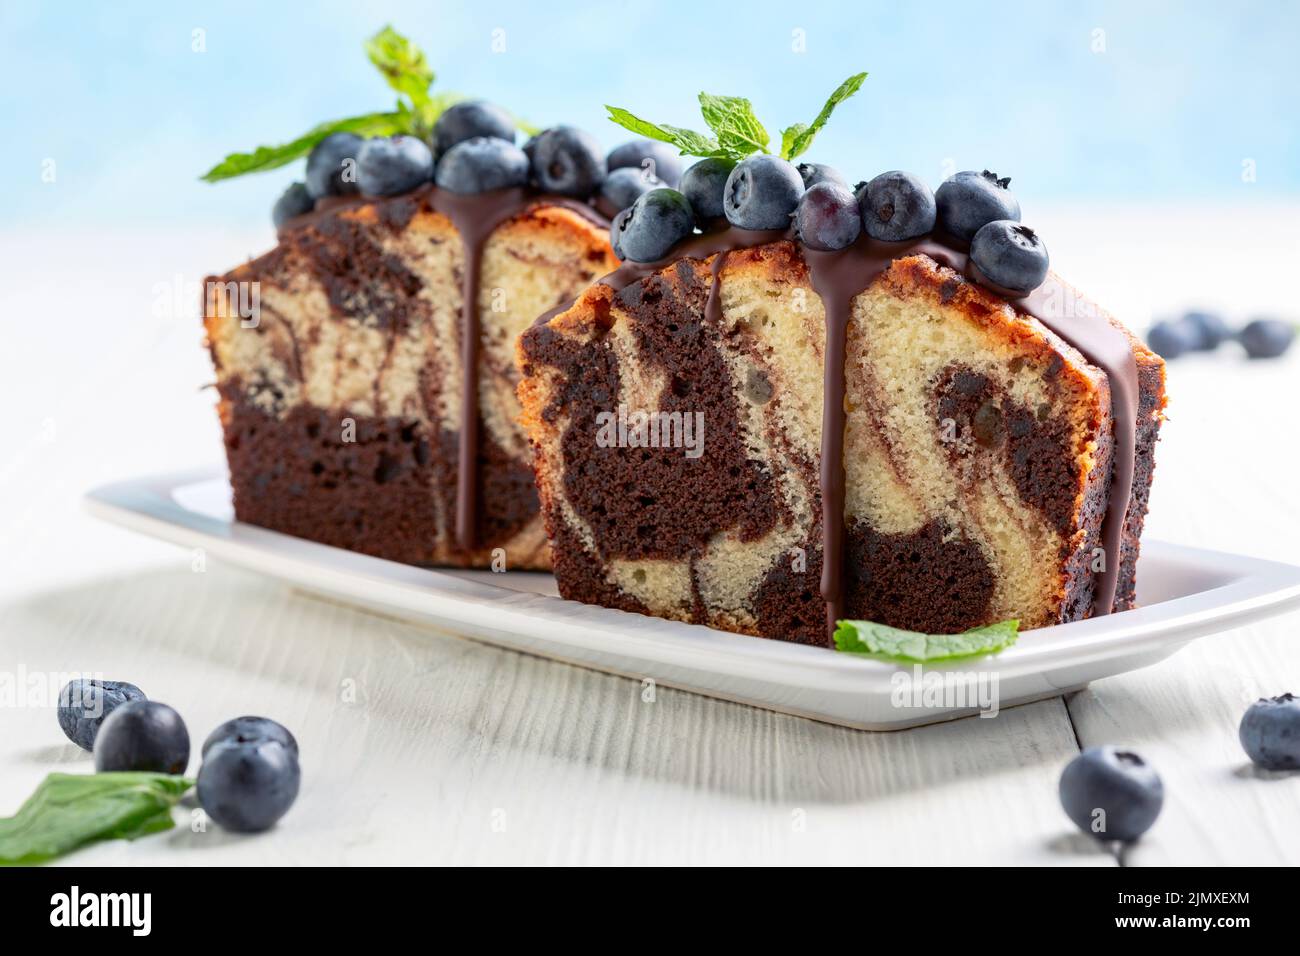 Marble cake with chocolate icing. Stock Photo